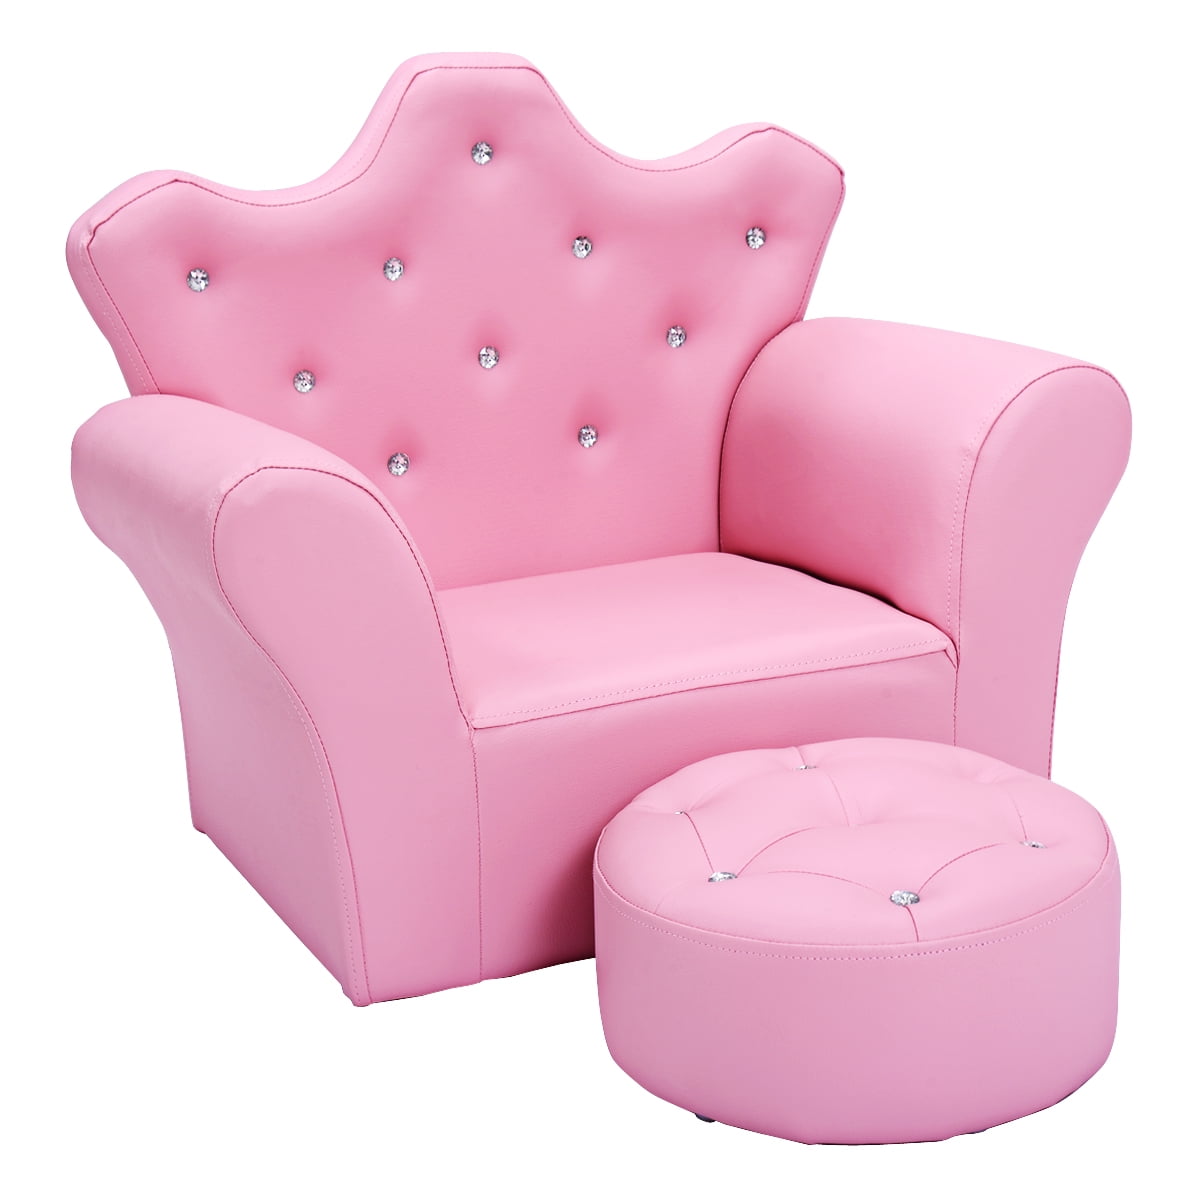 PU Leather Kids Sofa Armrest Chair Couch Children Birthday Gift Living Room Rose 